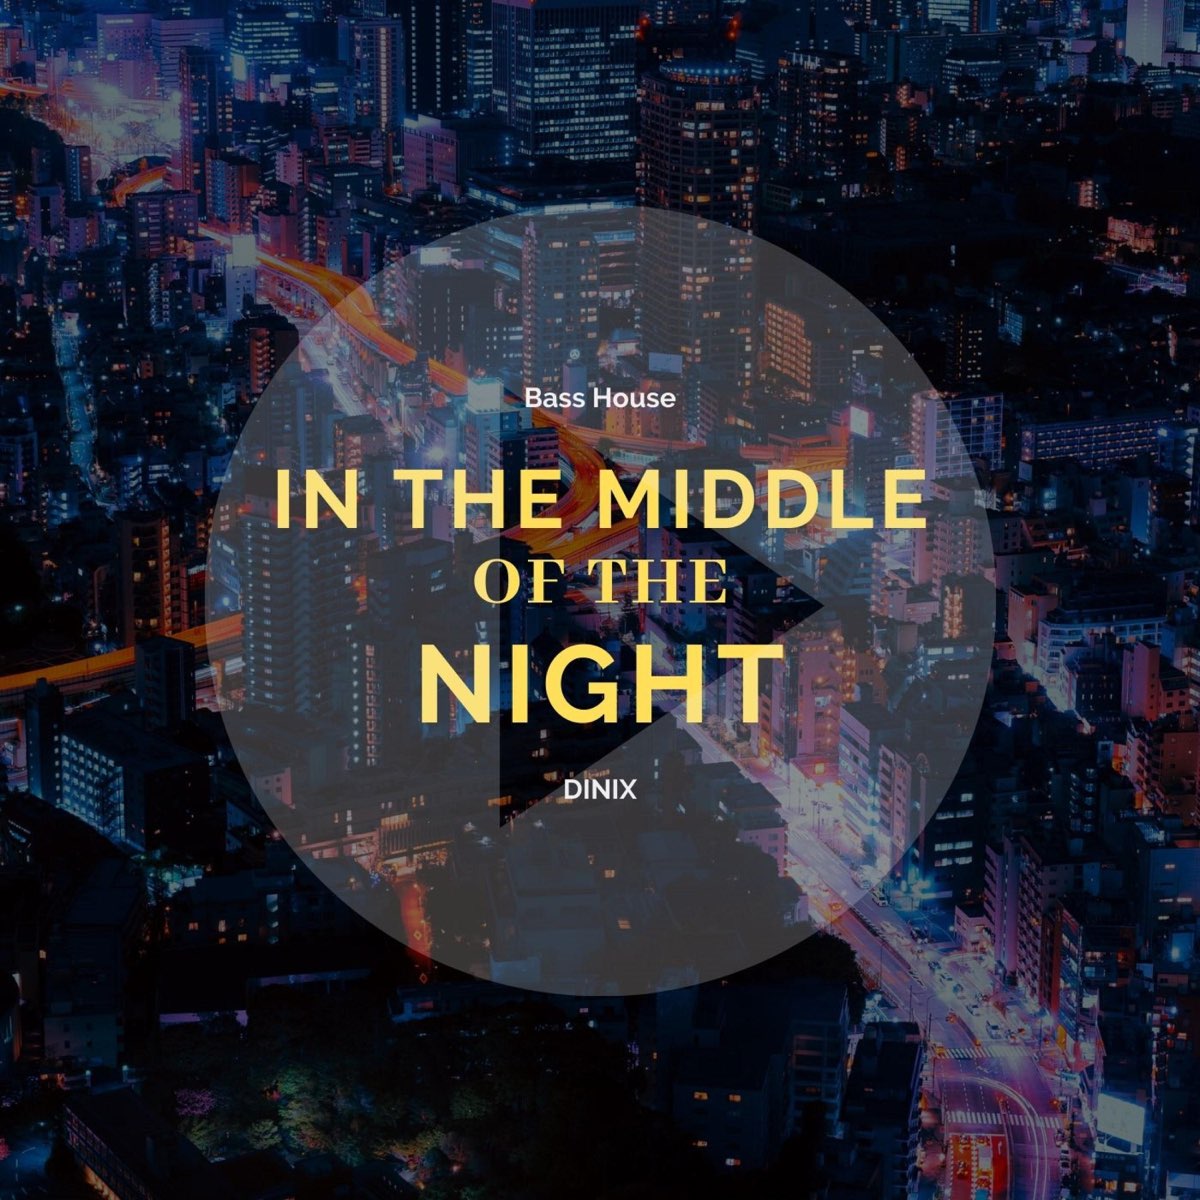 Middle of the night mp3. In the Middle of the Night. Middle of the Night текст. In the Middle on the Night. In the Middle of the Night картинки.